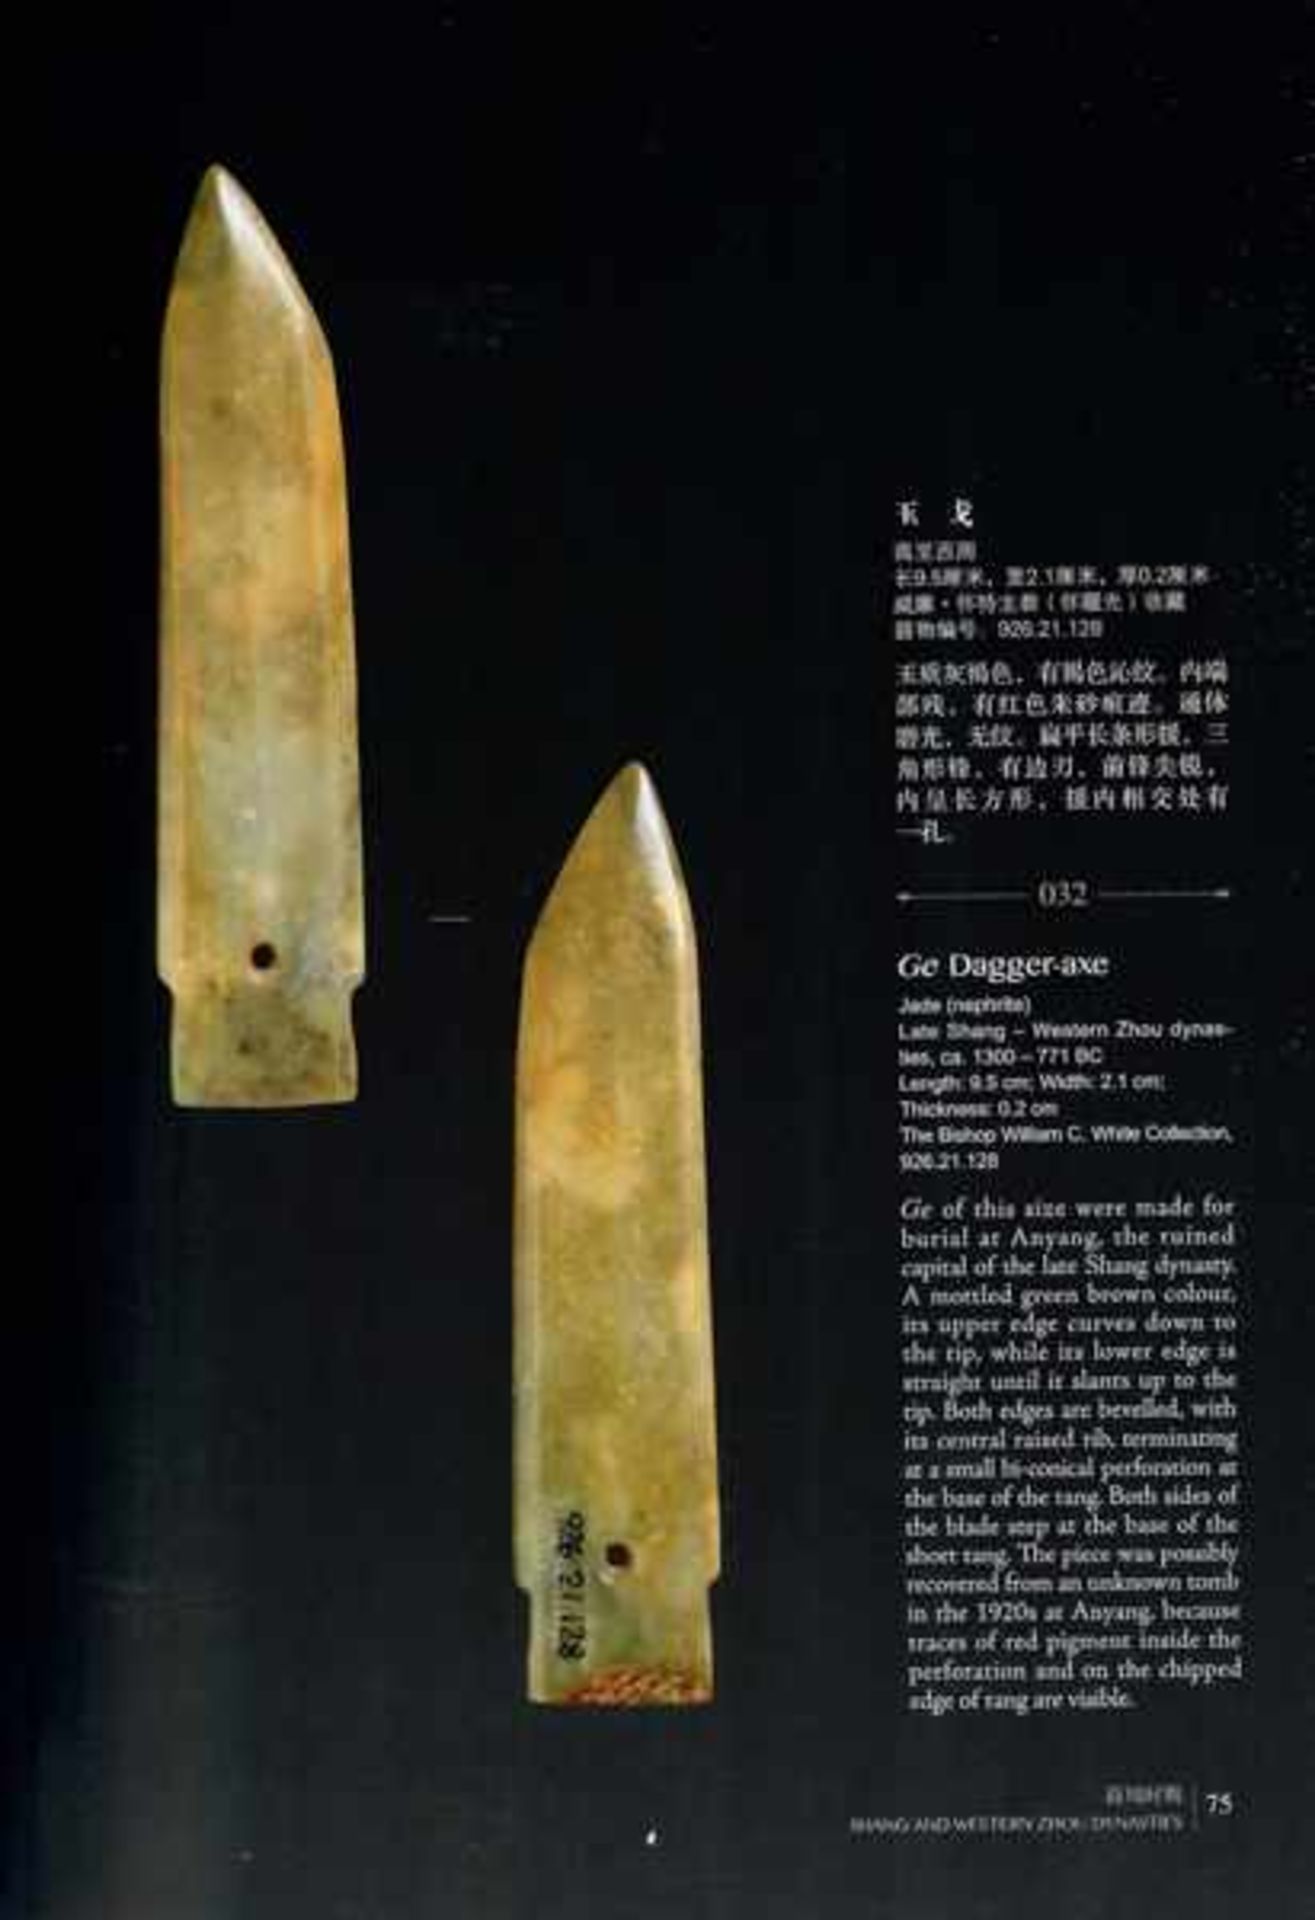 A FINELY CARVED SMALL GE DAGGER-AXE IN YELLOWISH JADE WITH DELICATE GROOVES Jade. China, Late Shang, - Image 6 of 7